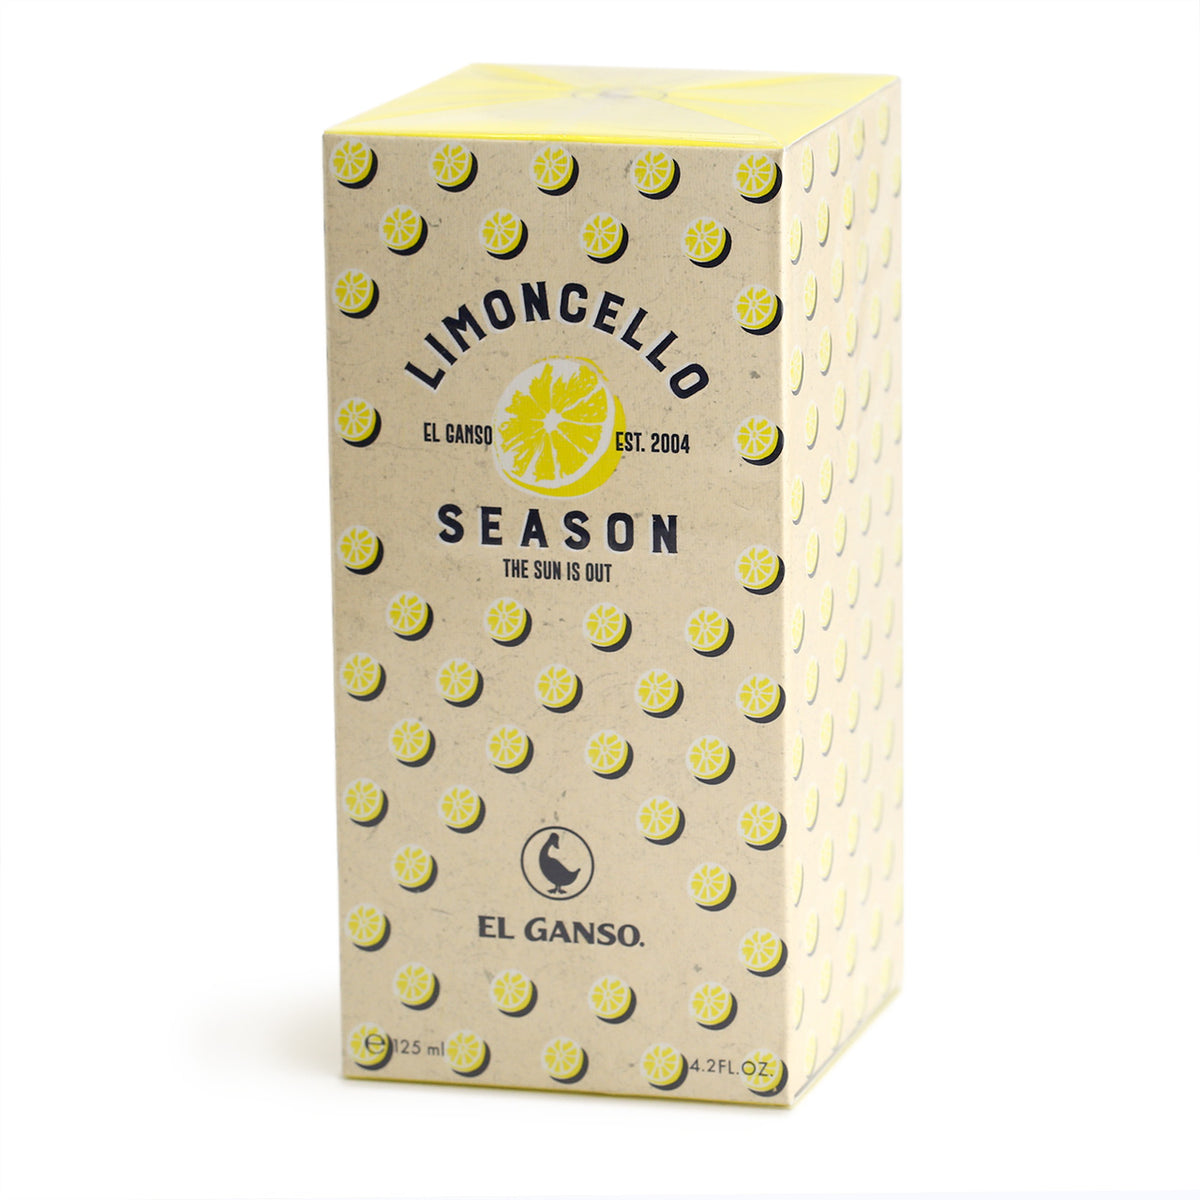 Limoncello EDT packaging with lemon slice graphics - Limoncello Season, The Sun Is Out. El Ganso Est.2004 and